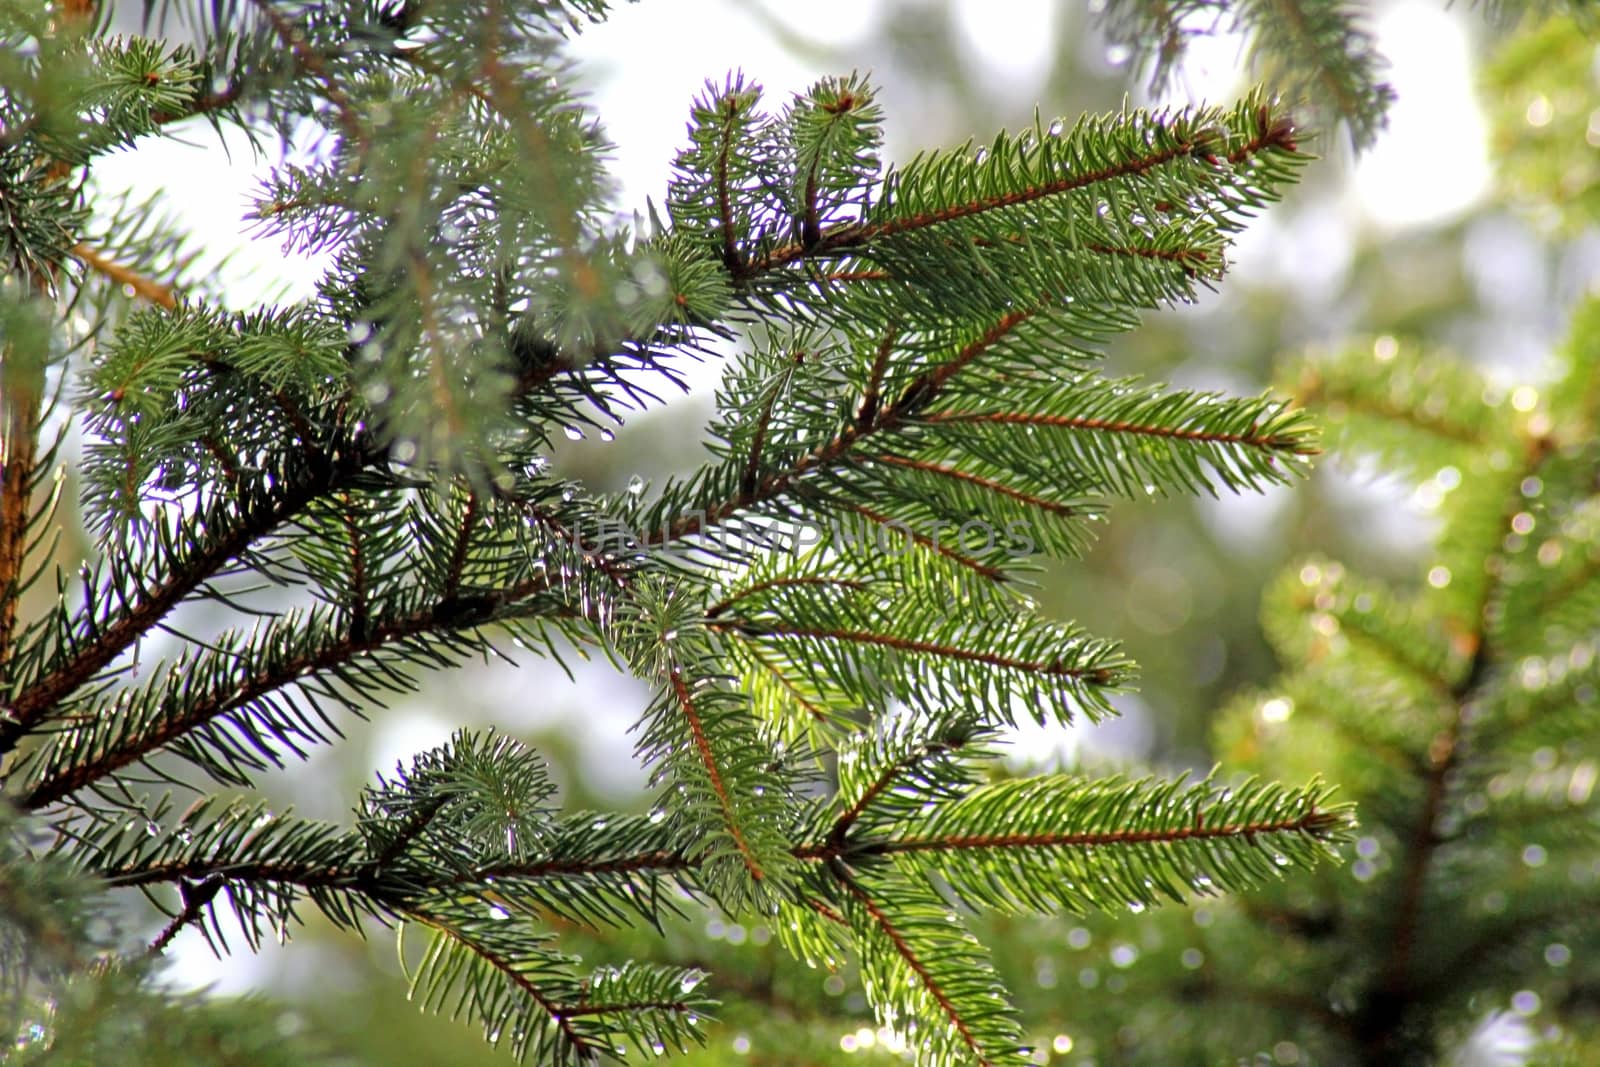 branches of spruce, covered with rain drops. Photographed close-up by zakob337